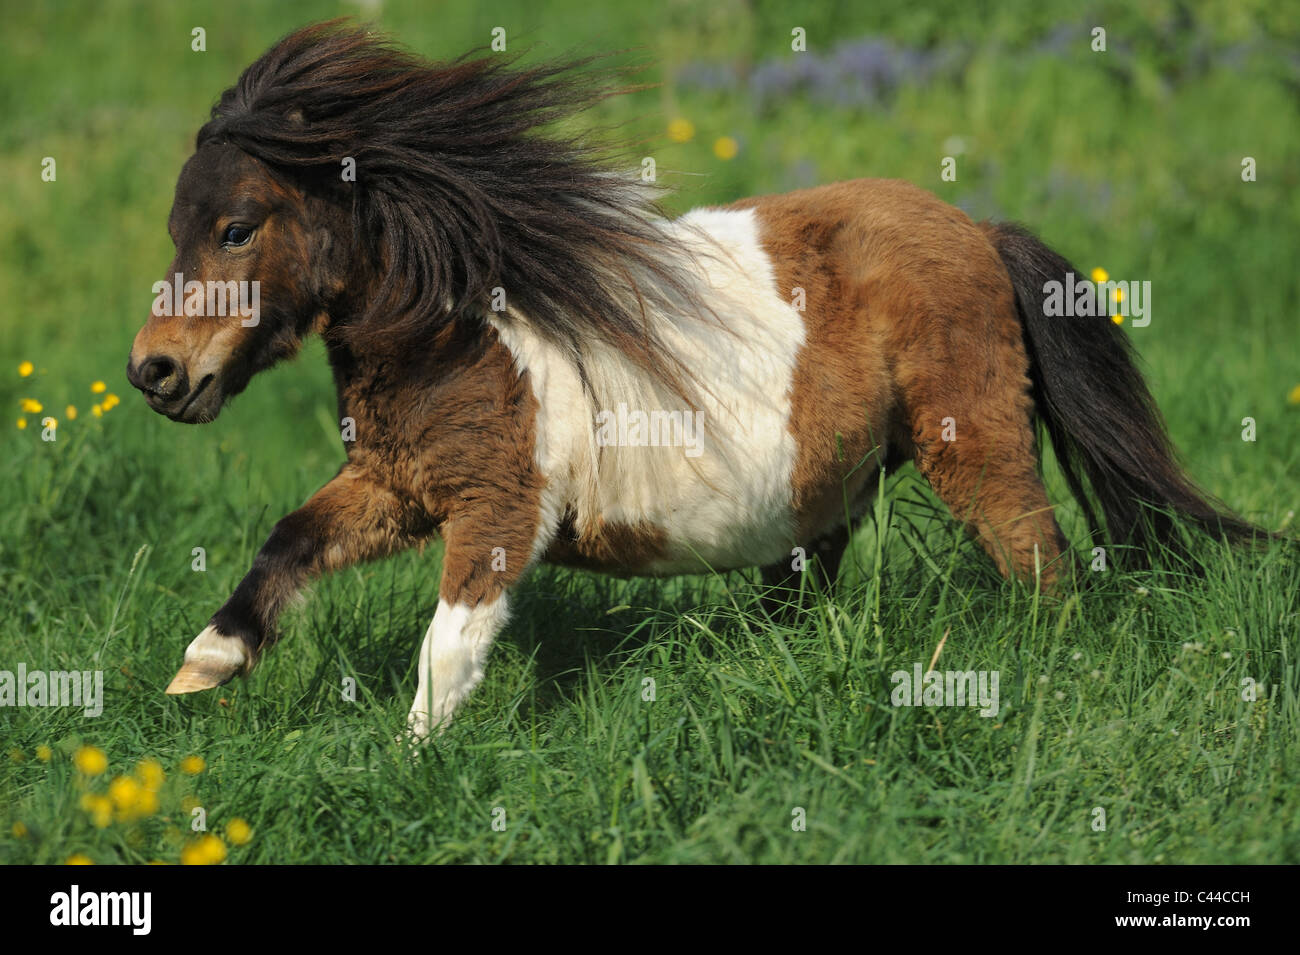 Miniature Shetland Pony (Equus ferus caballus). Pinto mare at a gallop on a meadow. Stock Photo